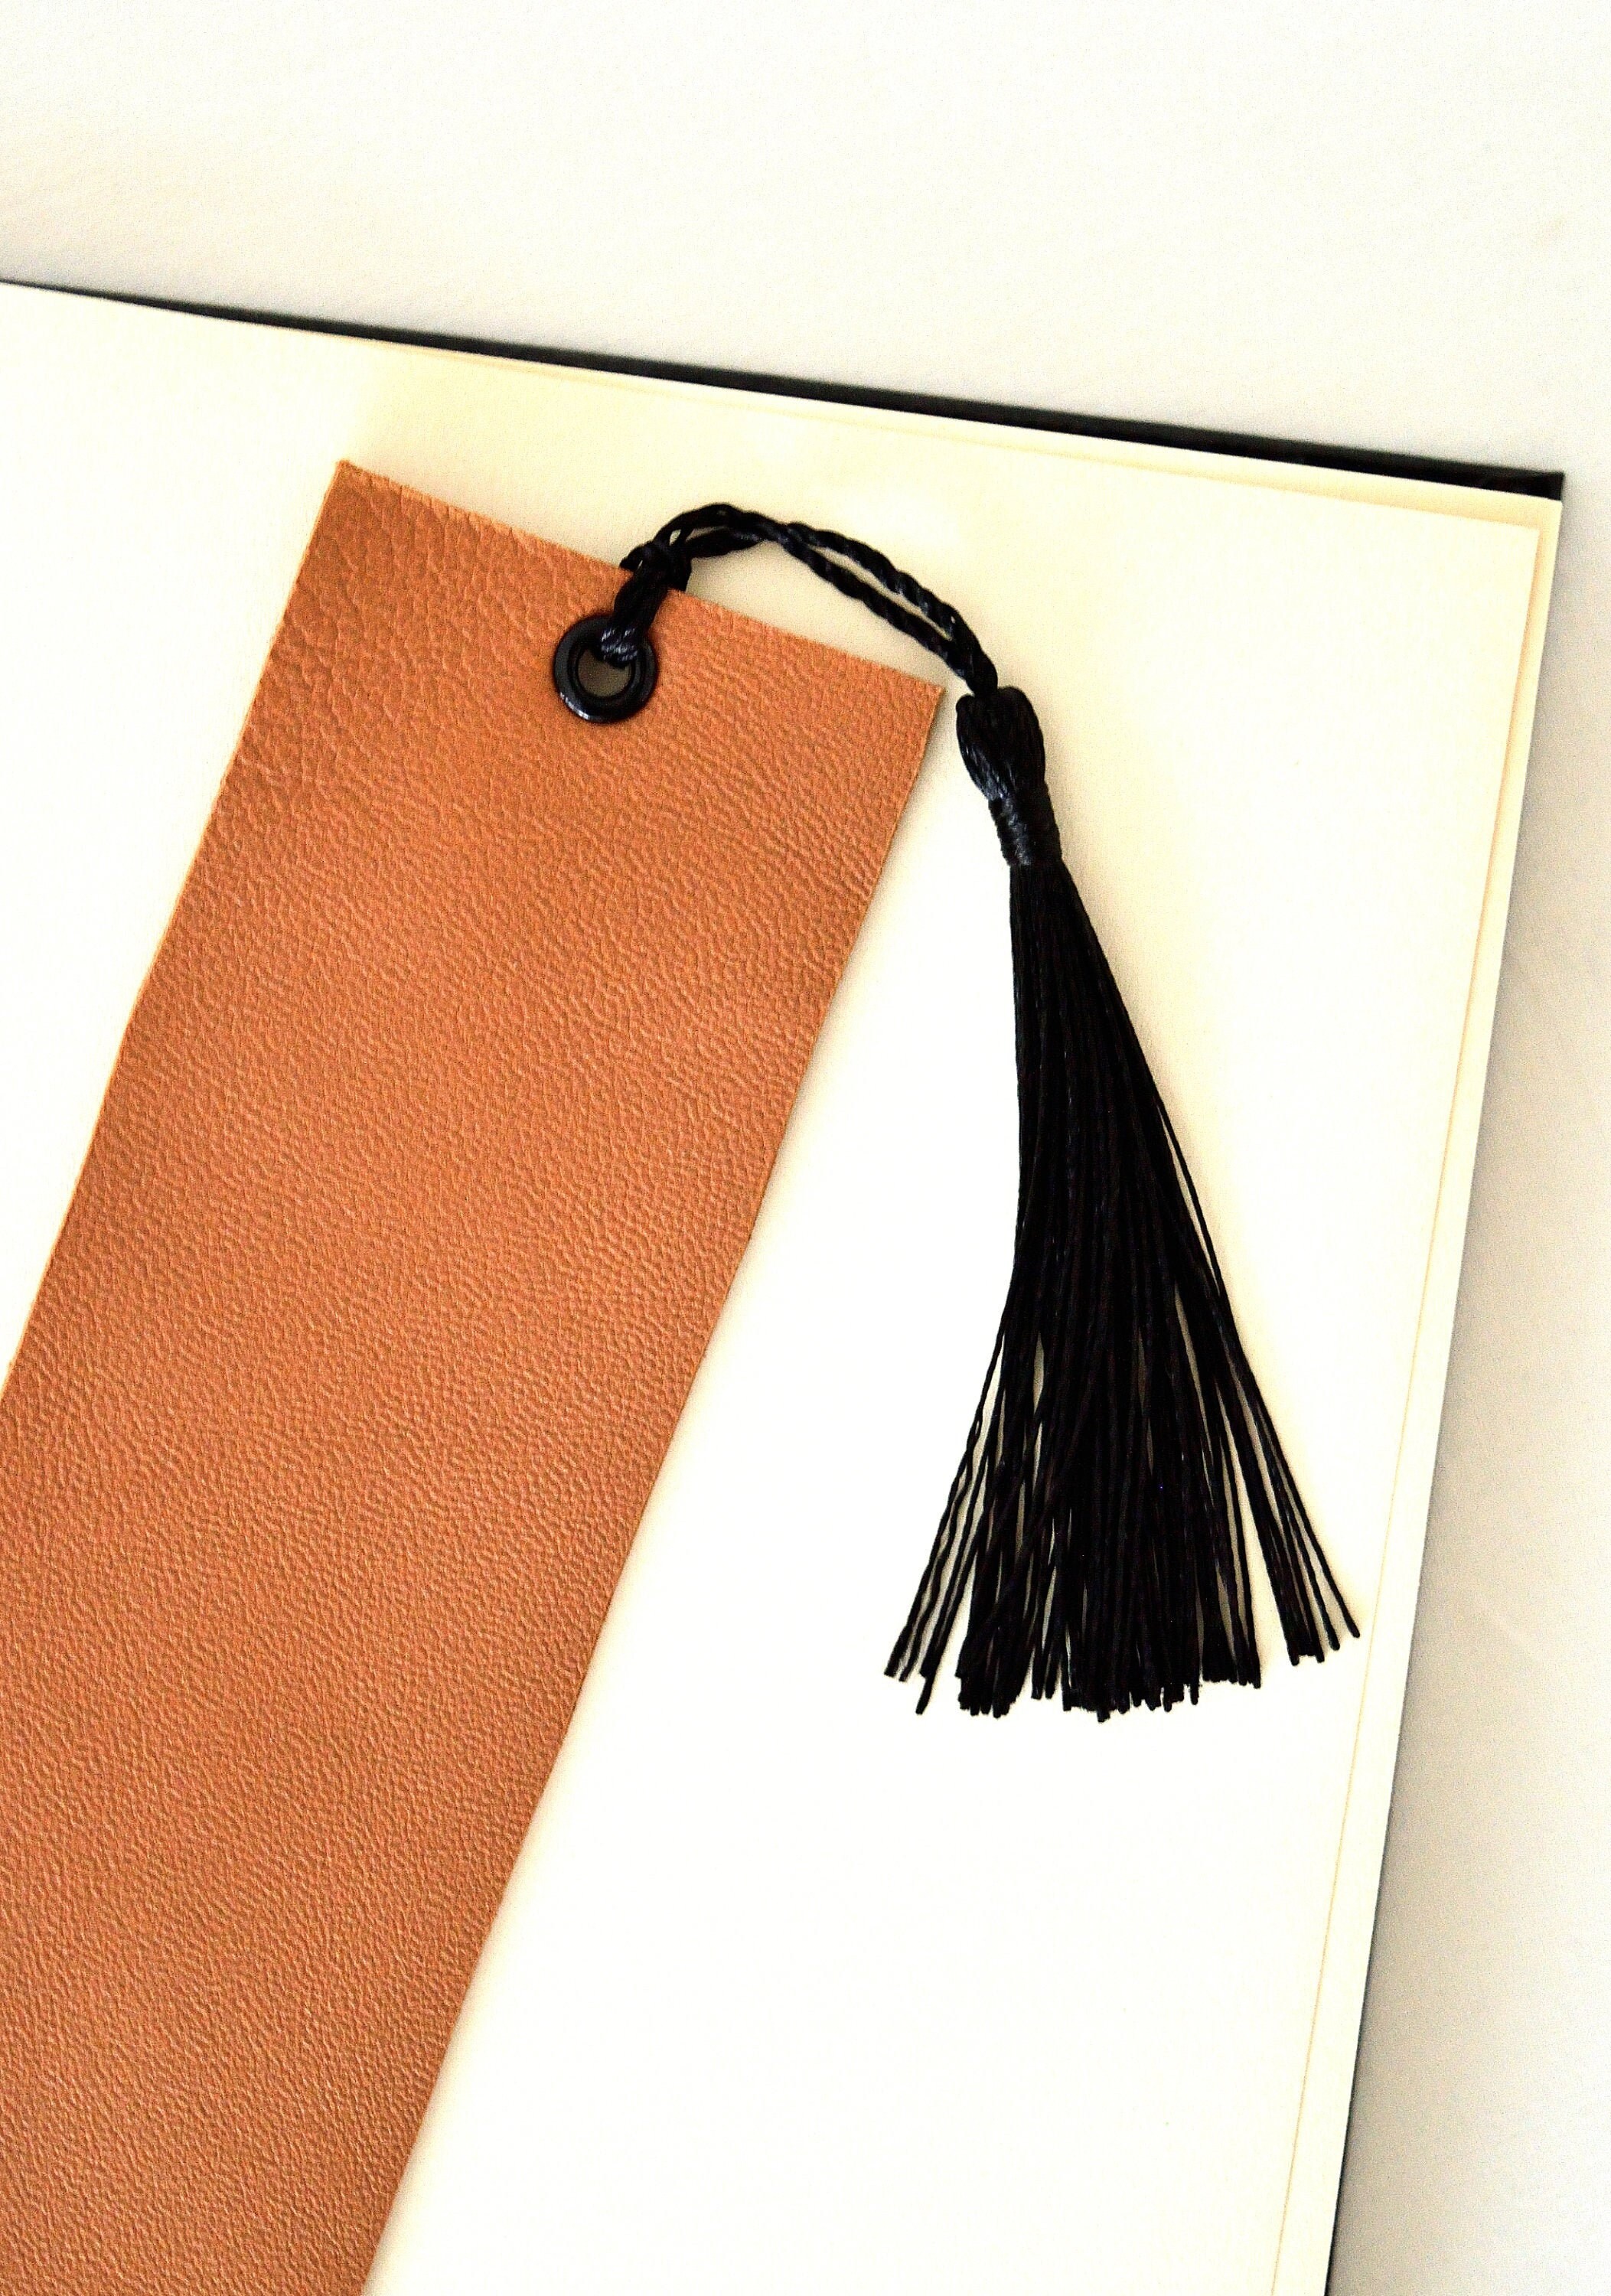 Handmade Leather Bookmark With Tassel, Brown Camel Marker for Your